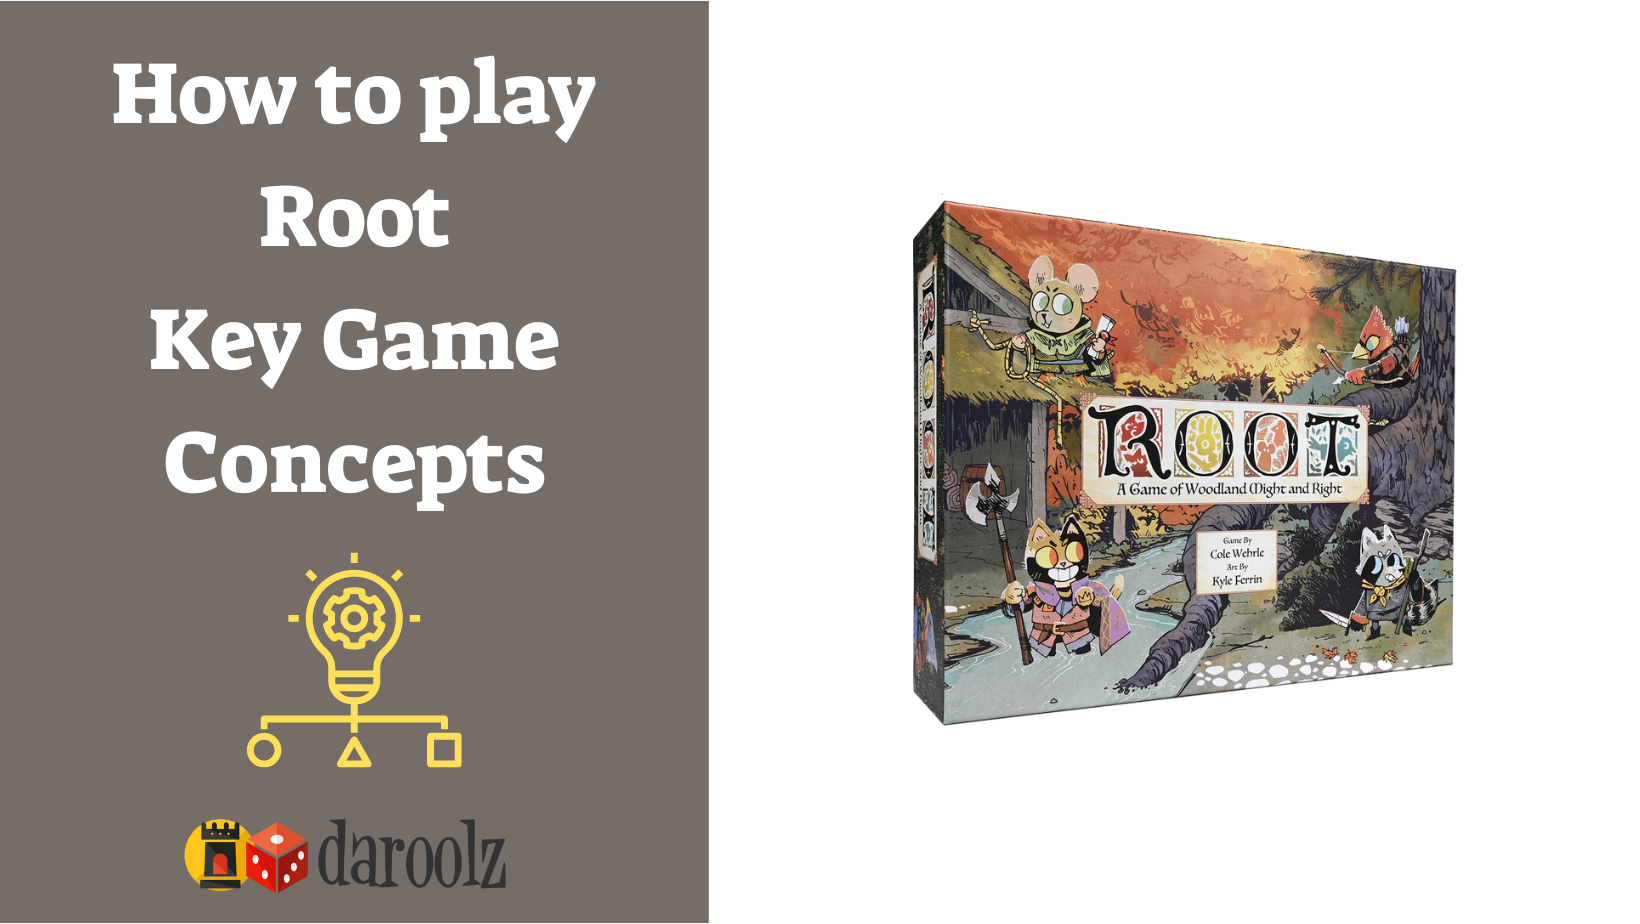 How to play Root - Game Concepts